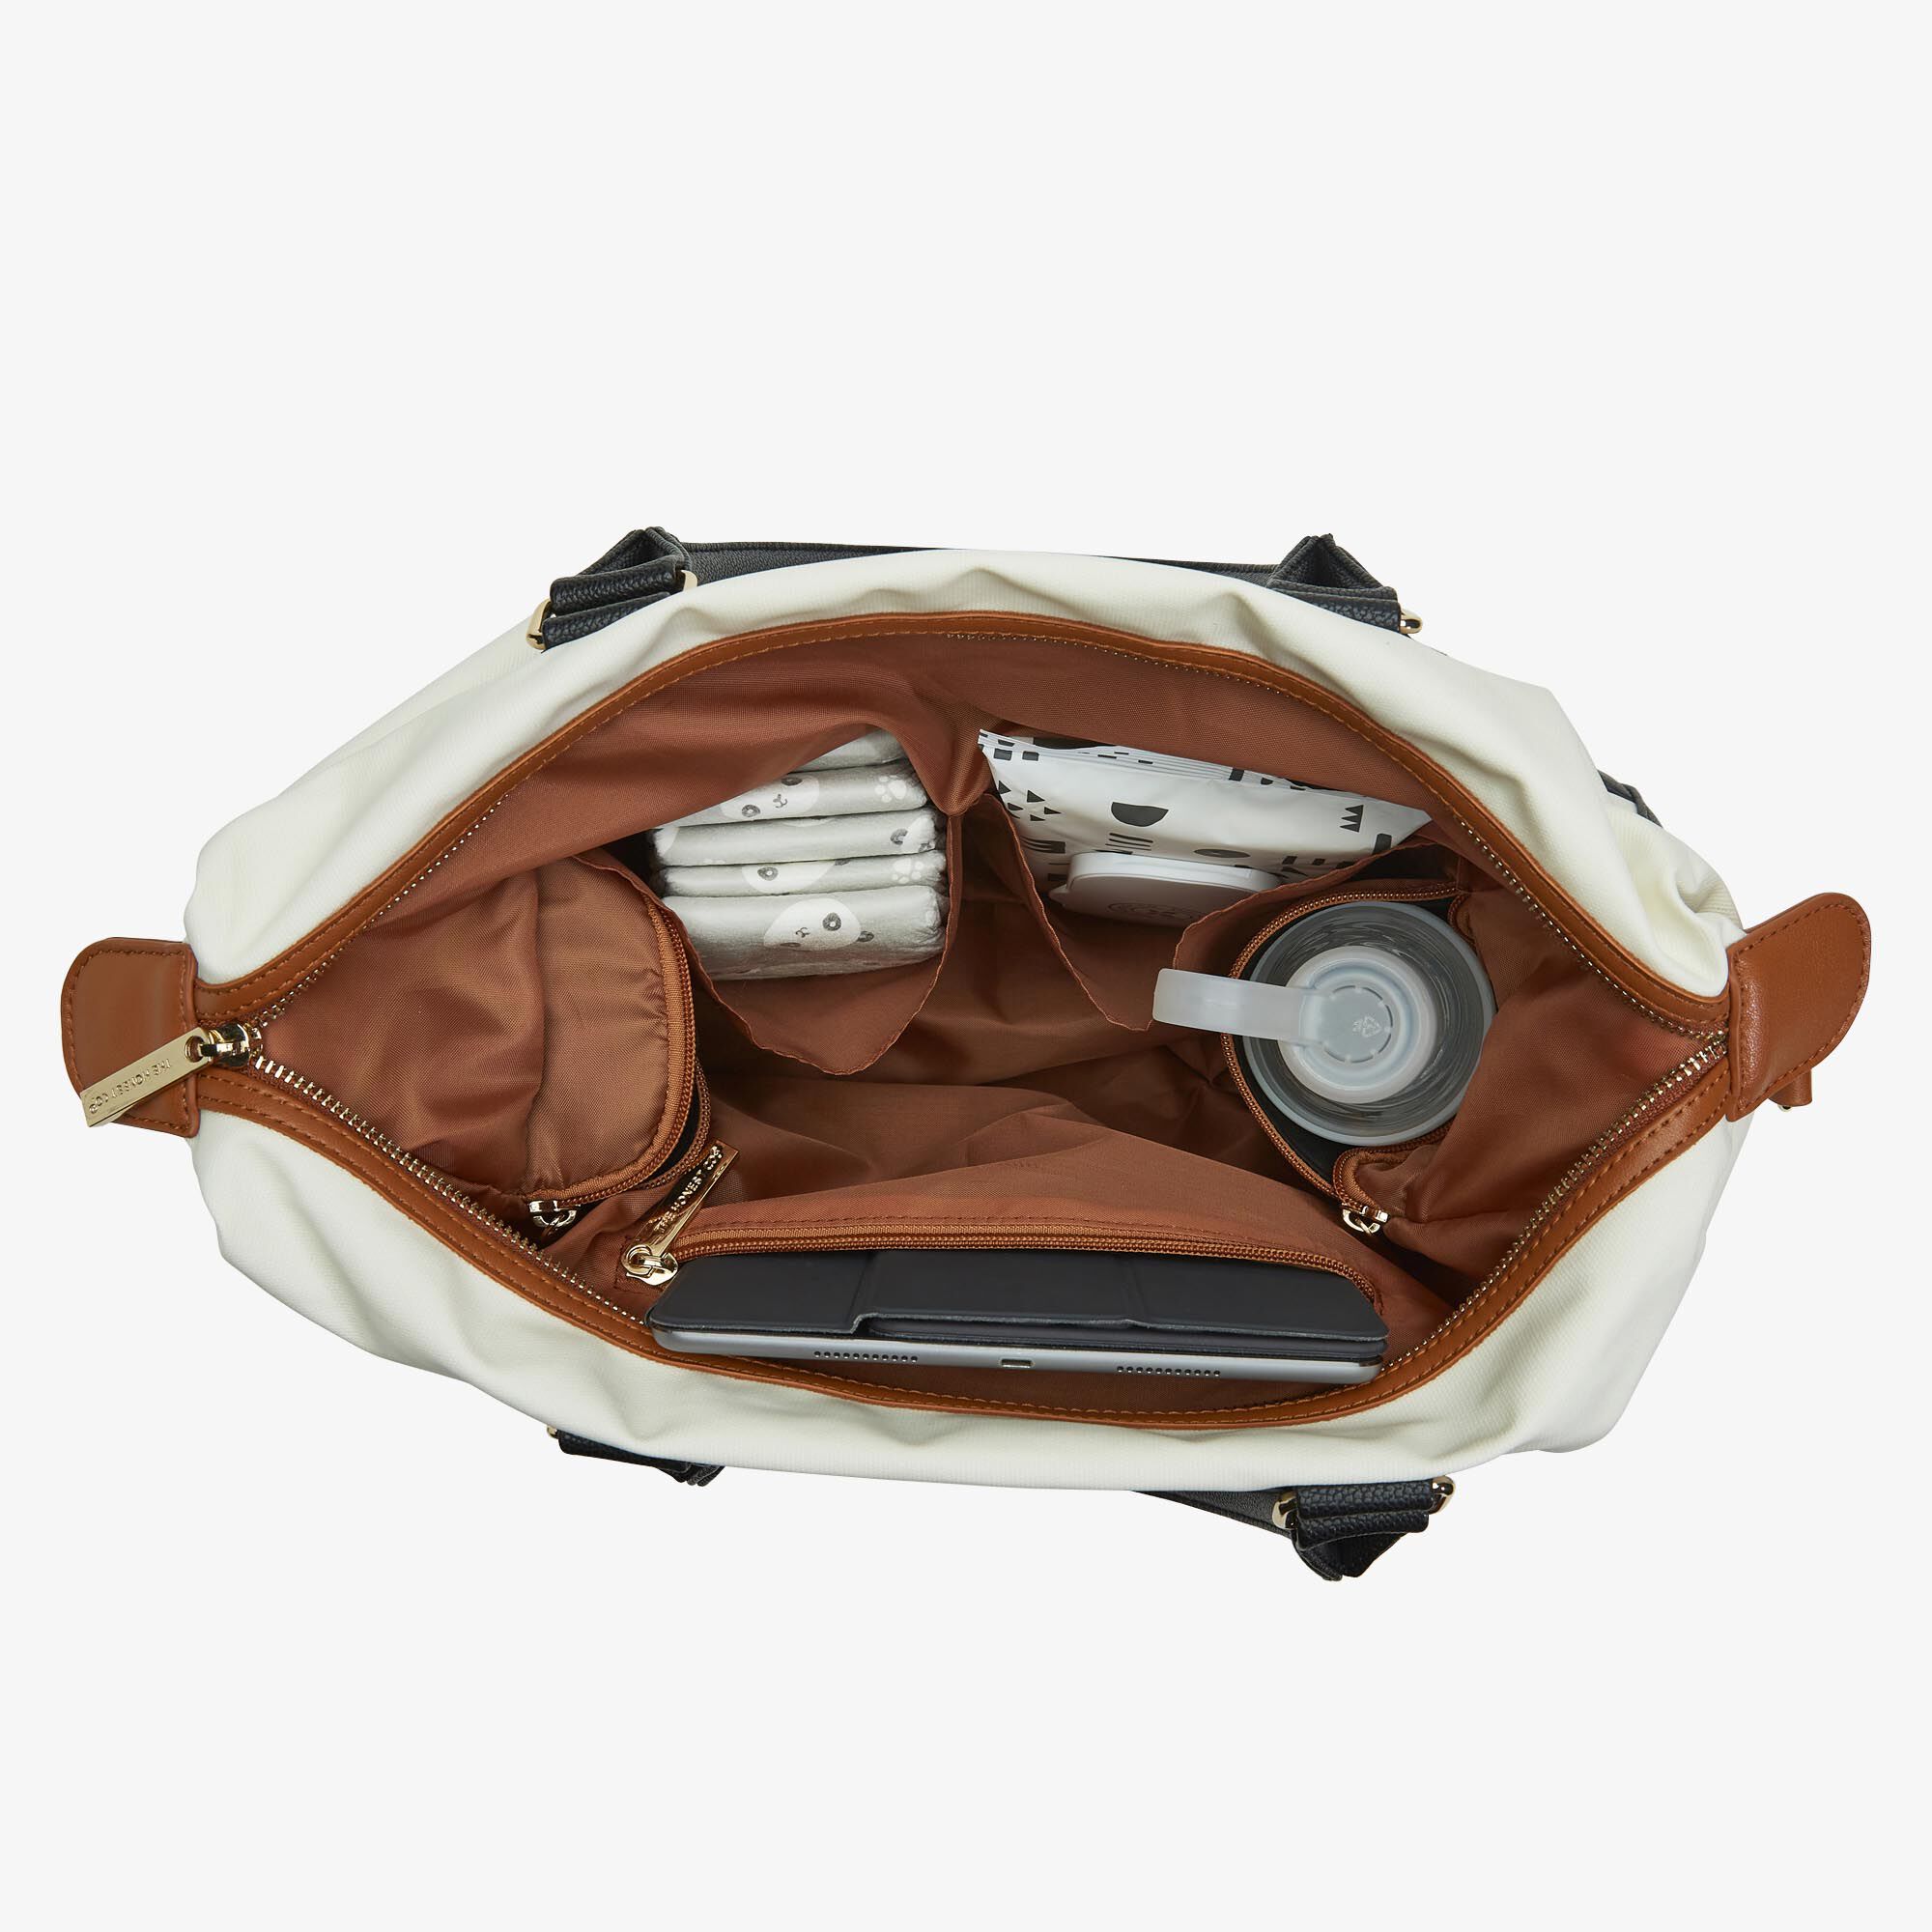 Crosstown Carryall Travel Tote